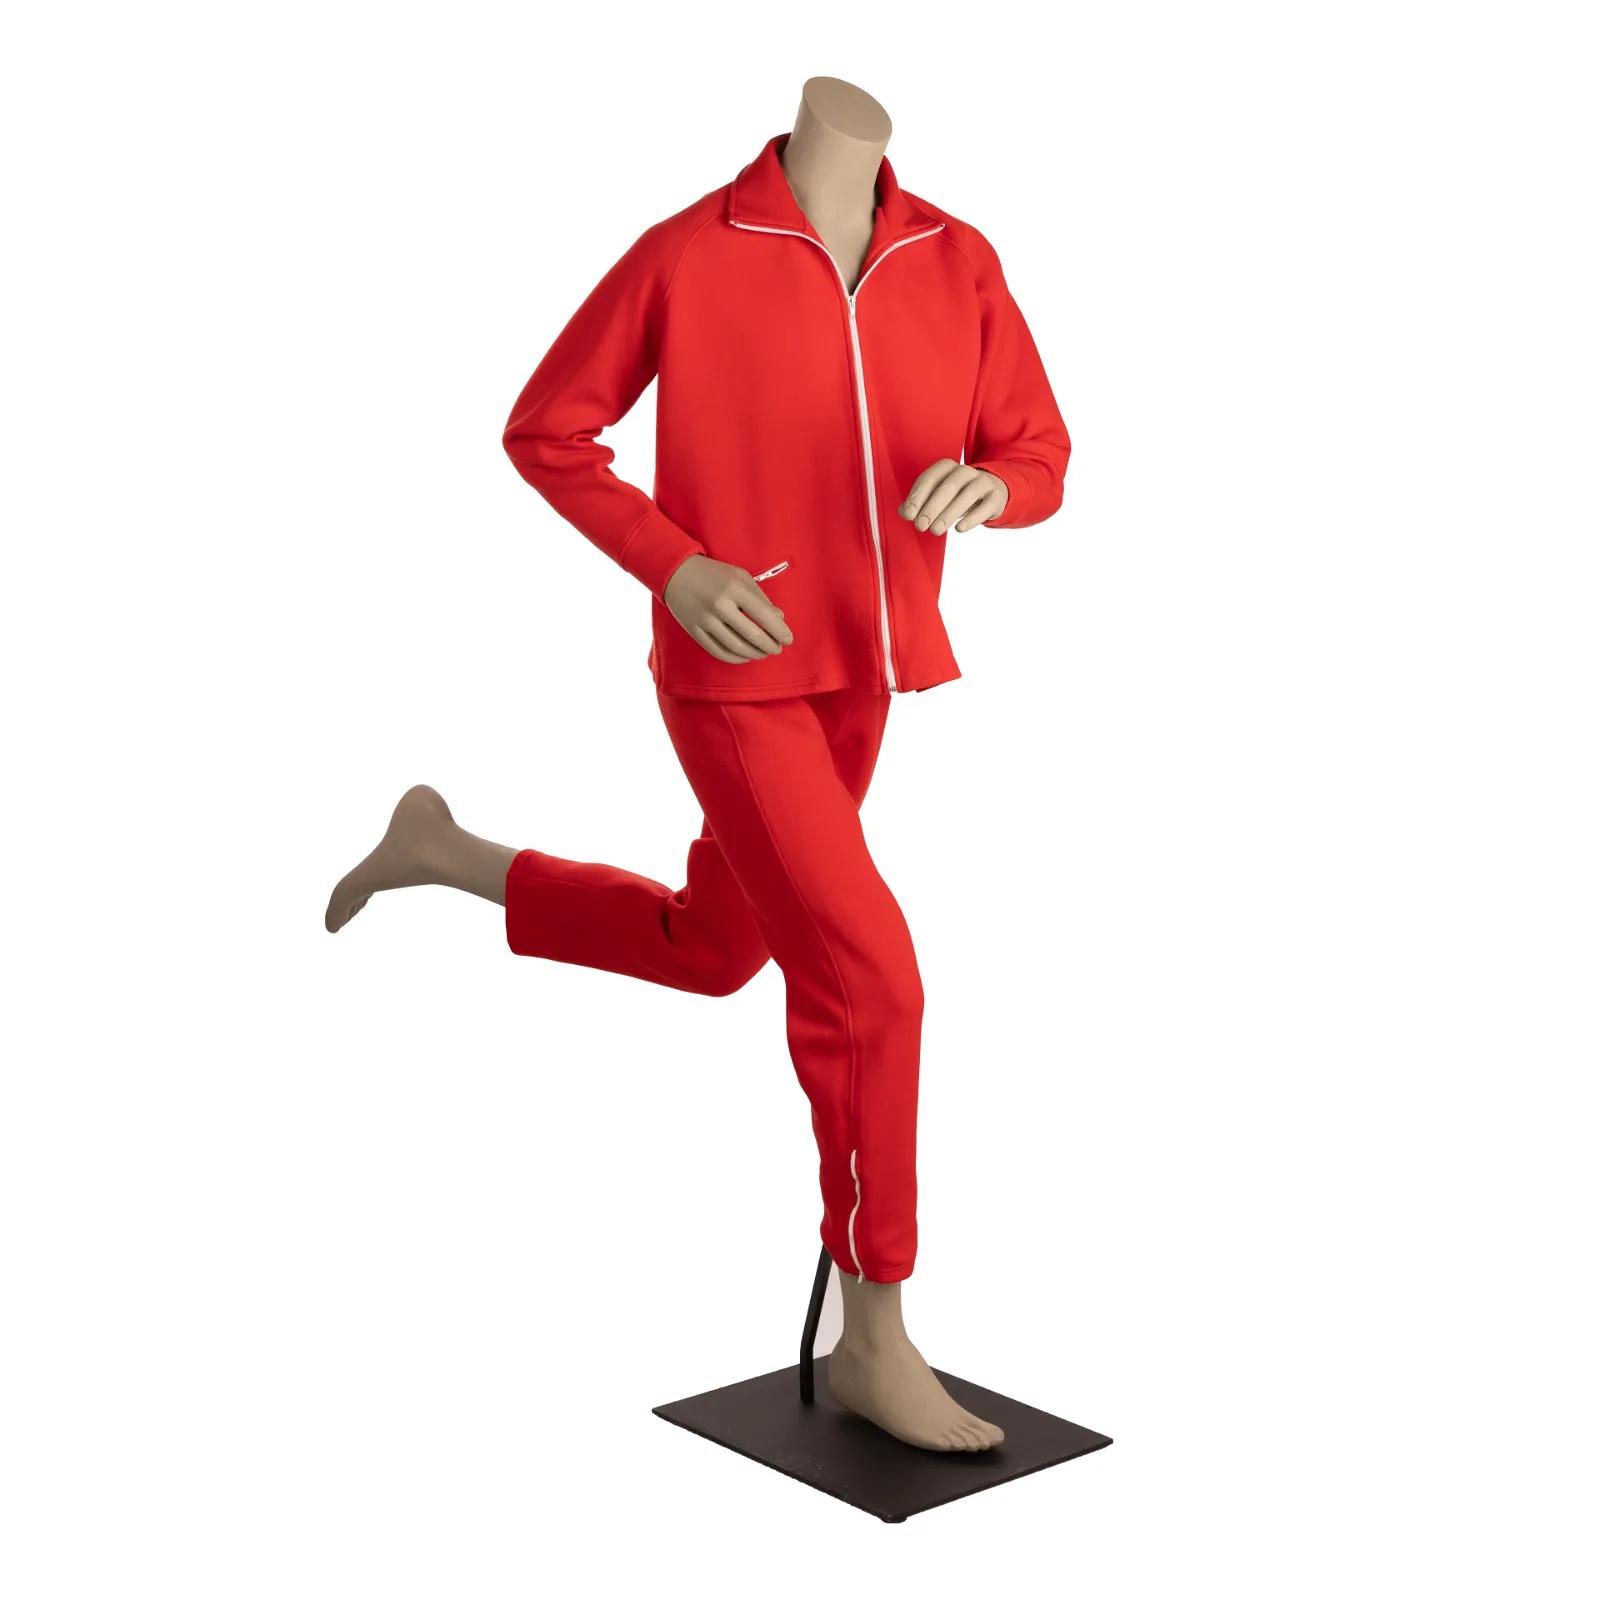 Screen-worn White Stag Speedo track suit from 'The Six Million Dollar Man,' which sold for $19,000 ($24,700 with buyer’s premium) at Studio Auctions.